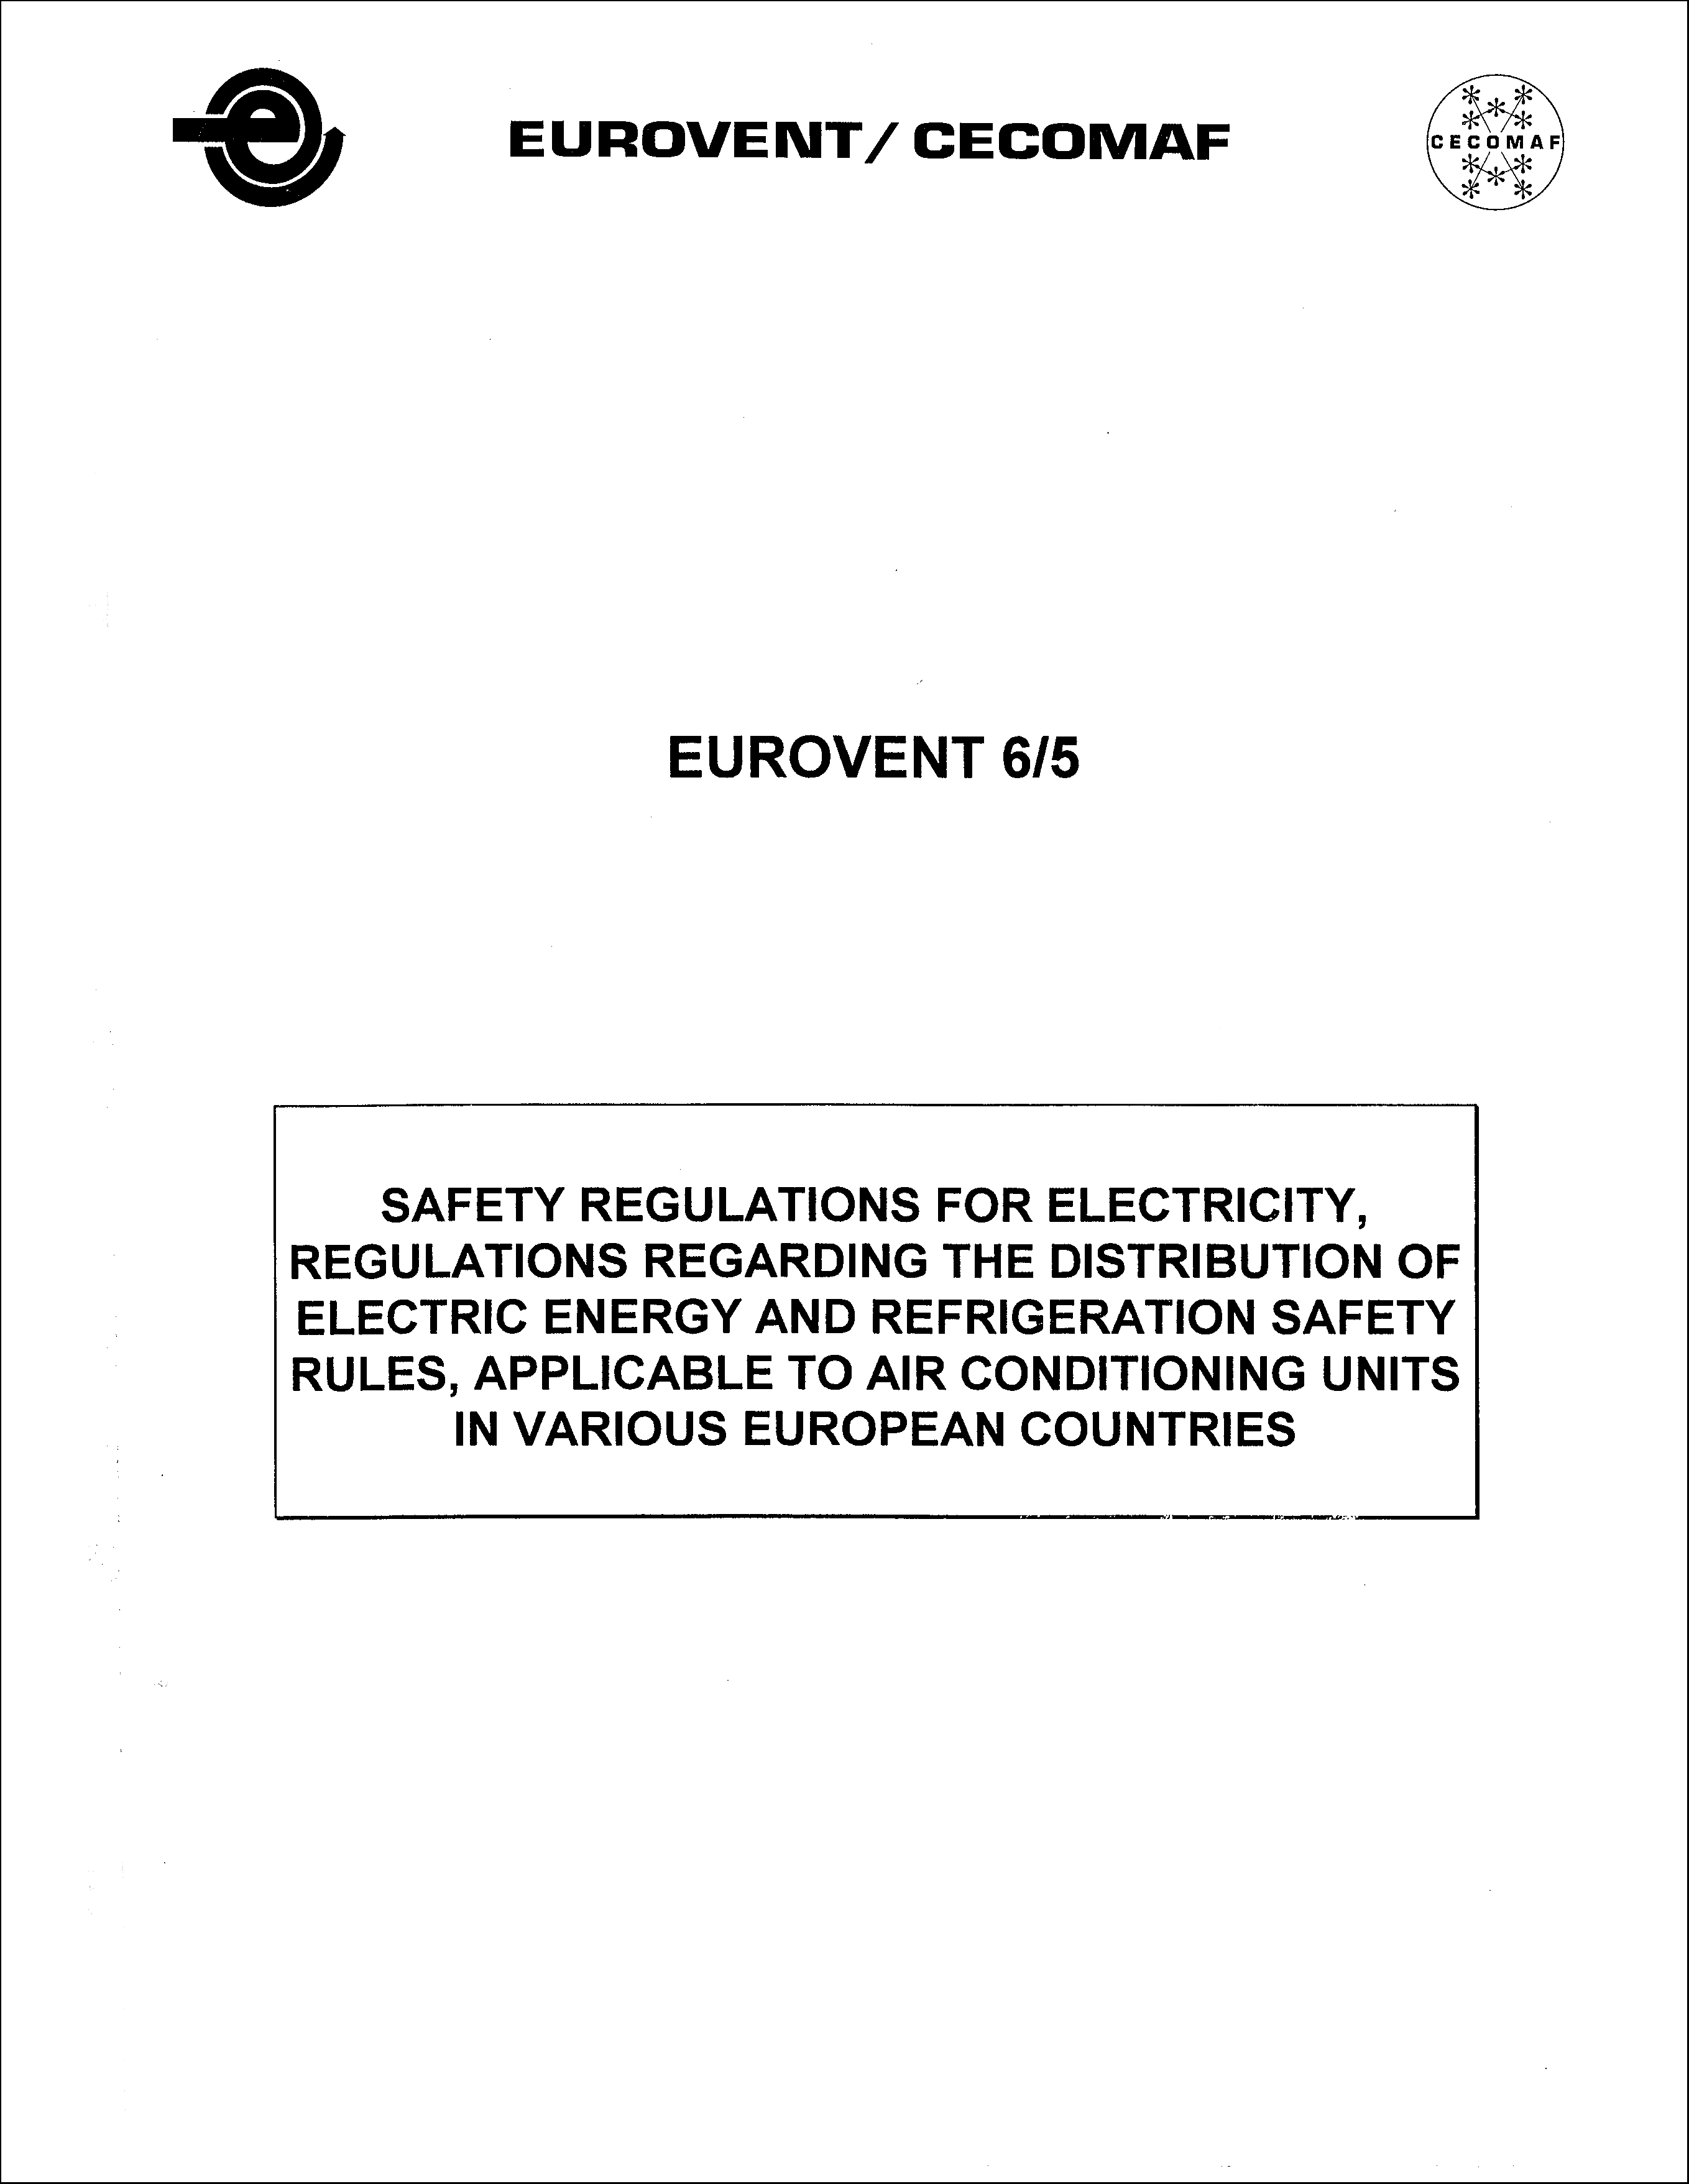 1985 - Safety regulations for electricity